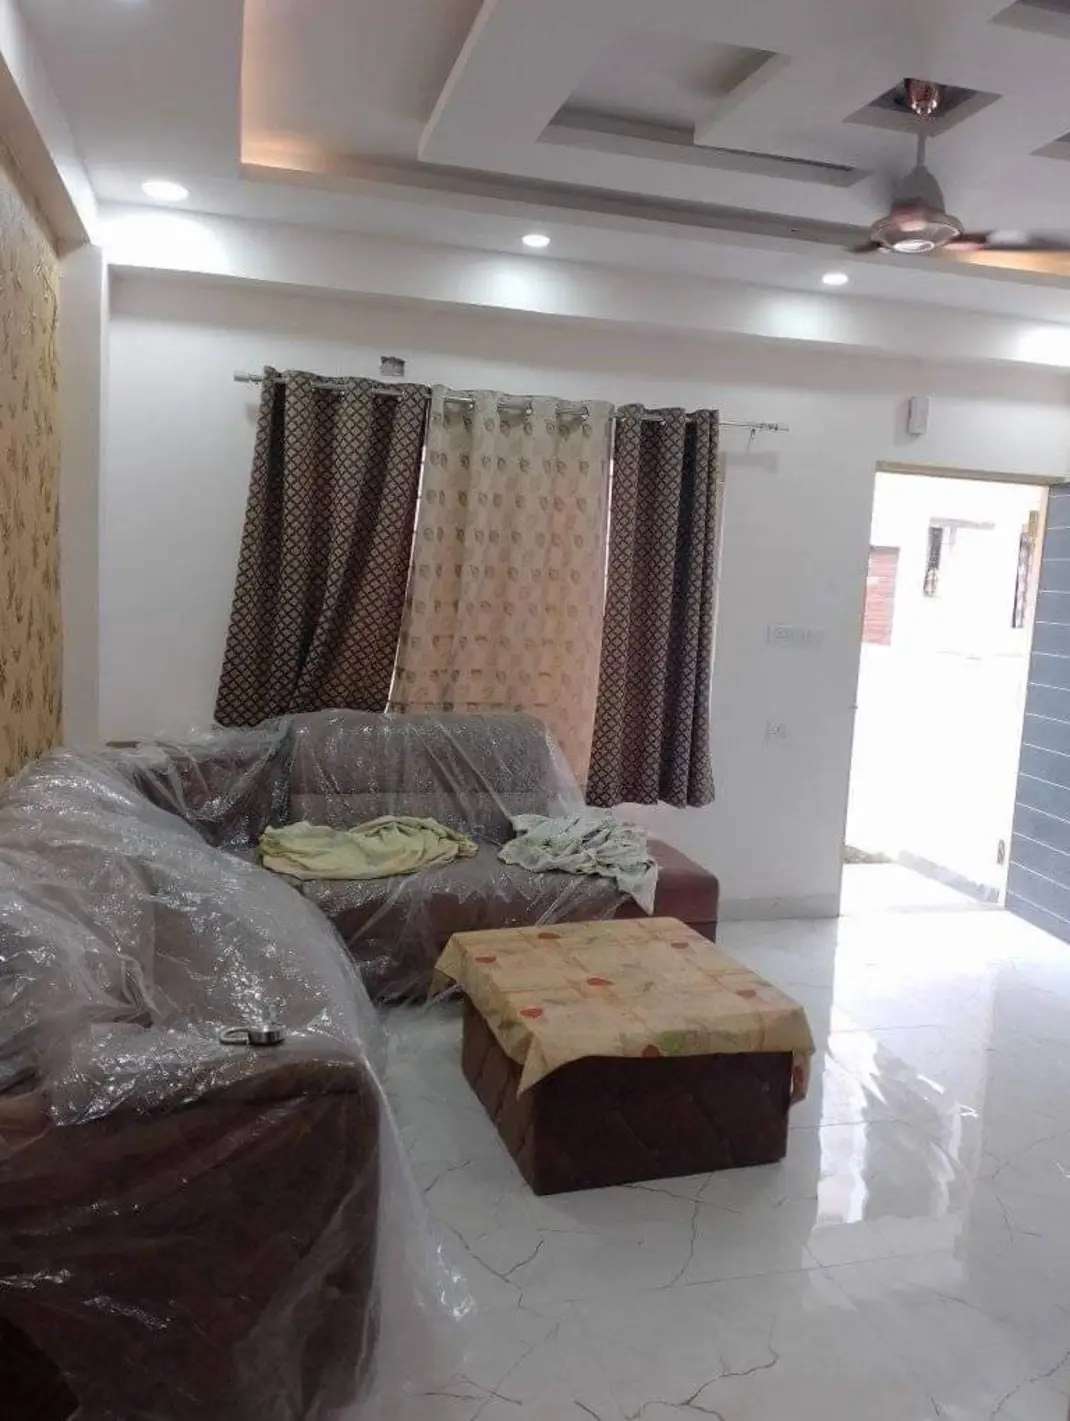 3 Bed/ 3 Bath Rent House/ Bungalow/ Villa, Furnished for rent @Near people's Mall ayodhya bypass road Bhopal 